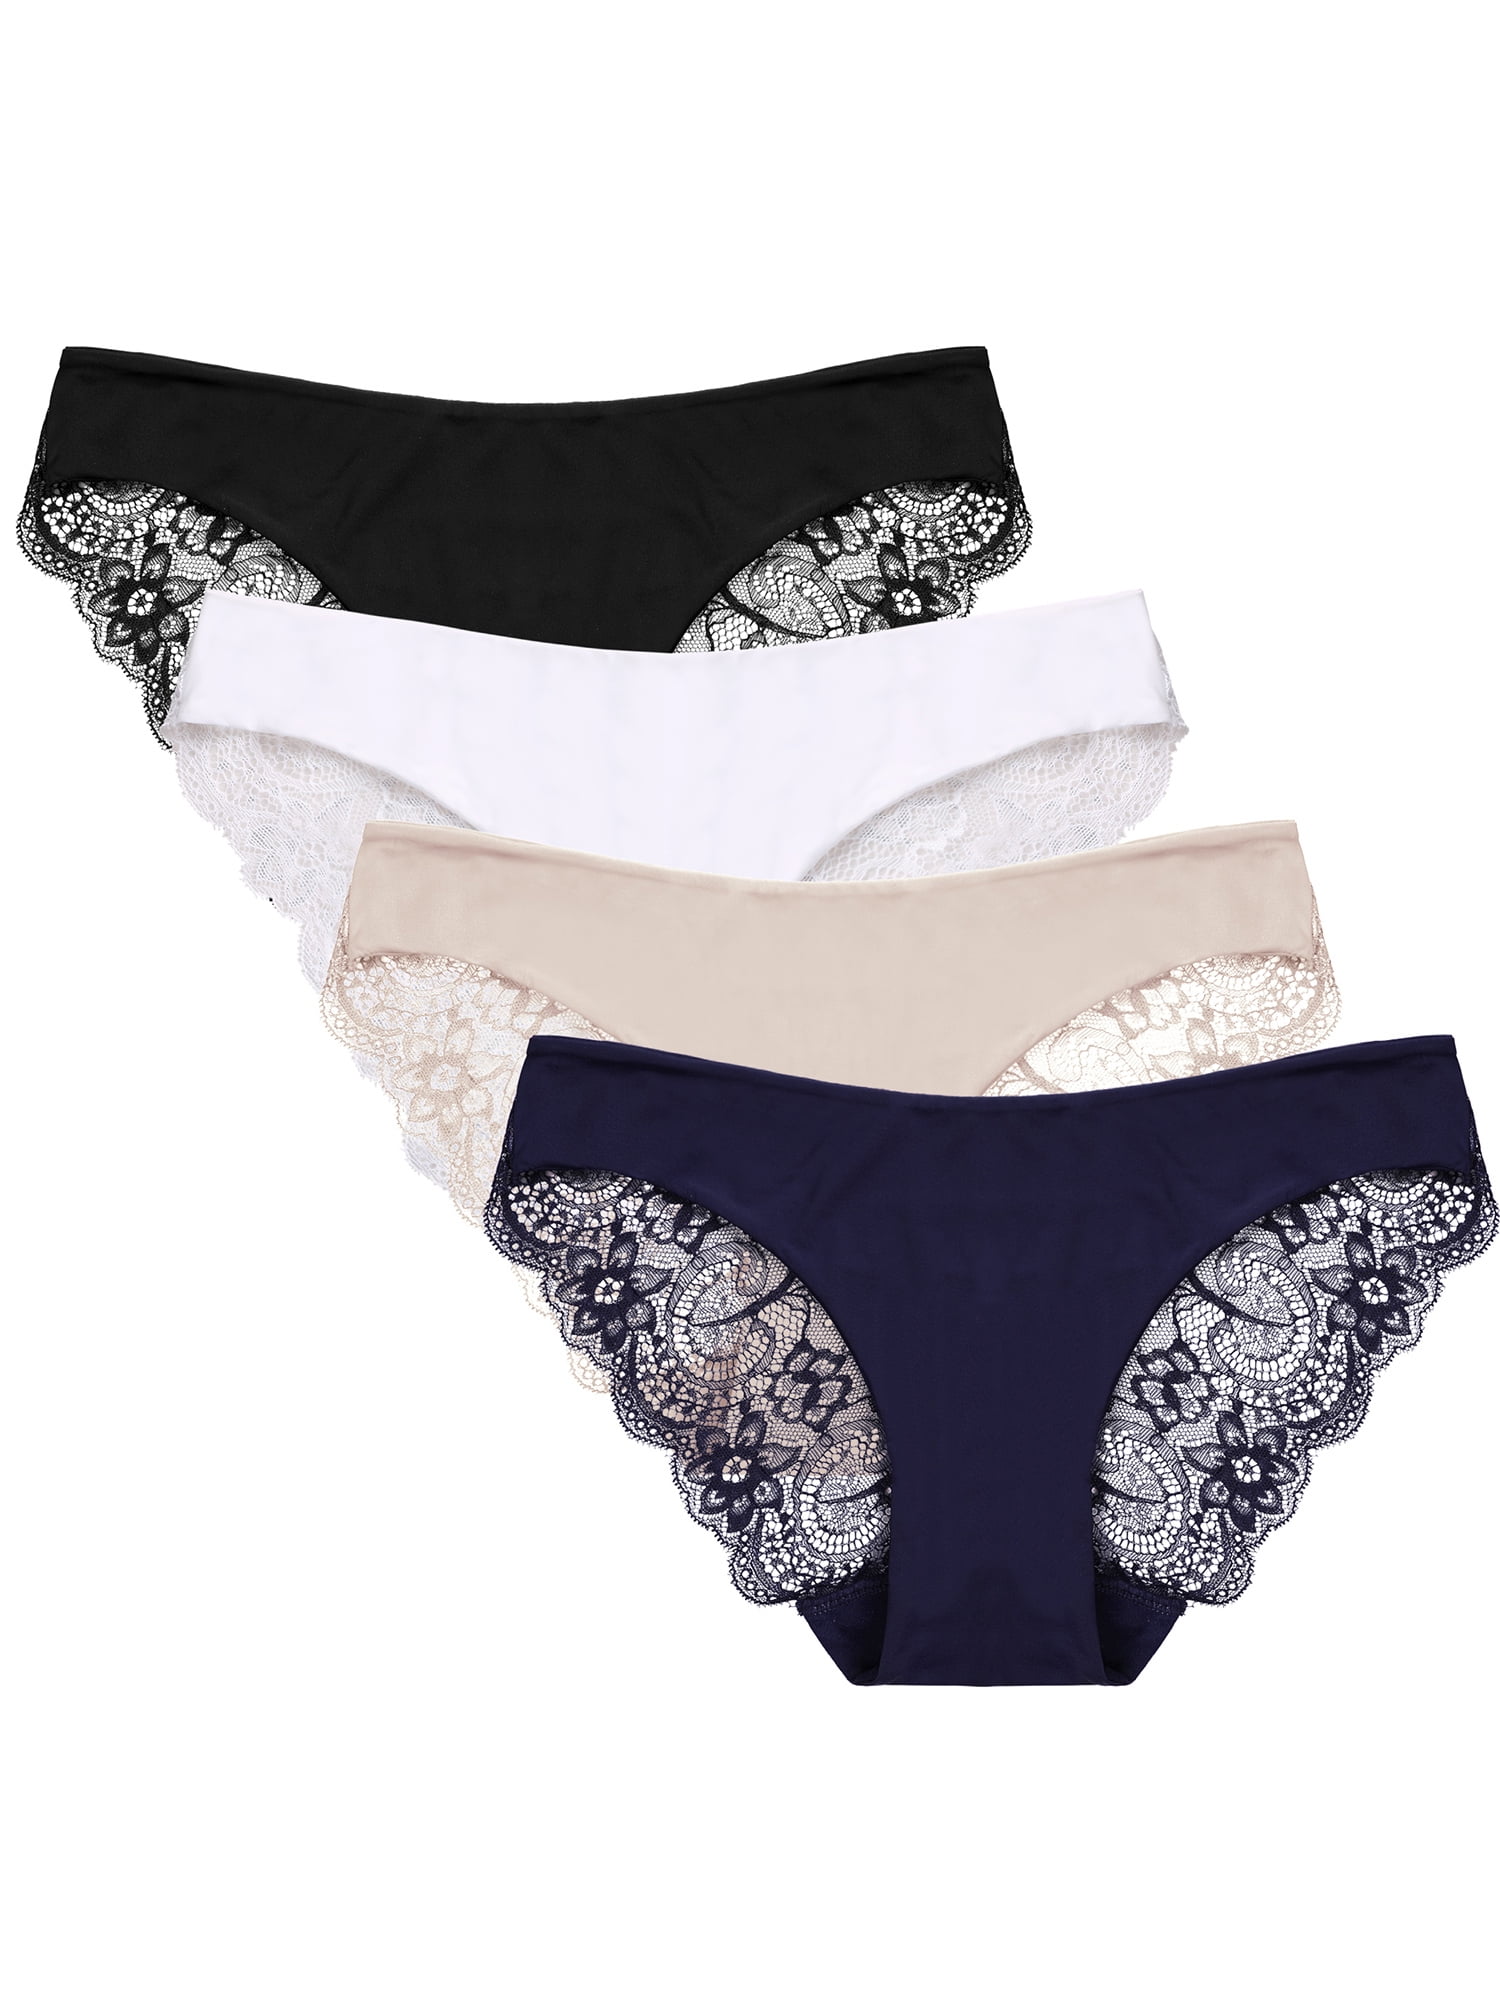 INNERSY Women's underwear panties floral lace hipster 5 pairs